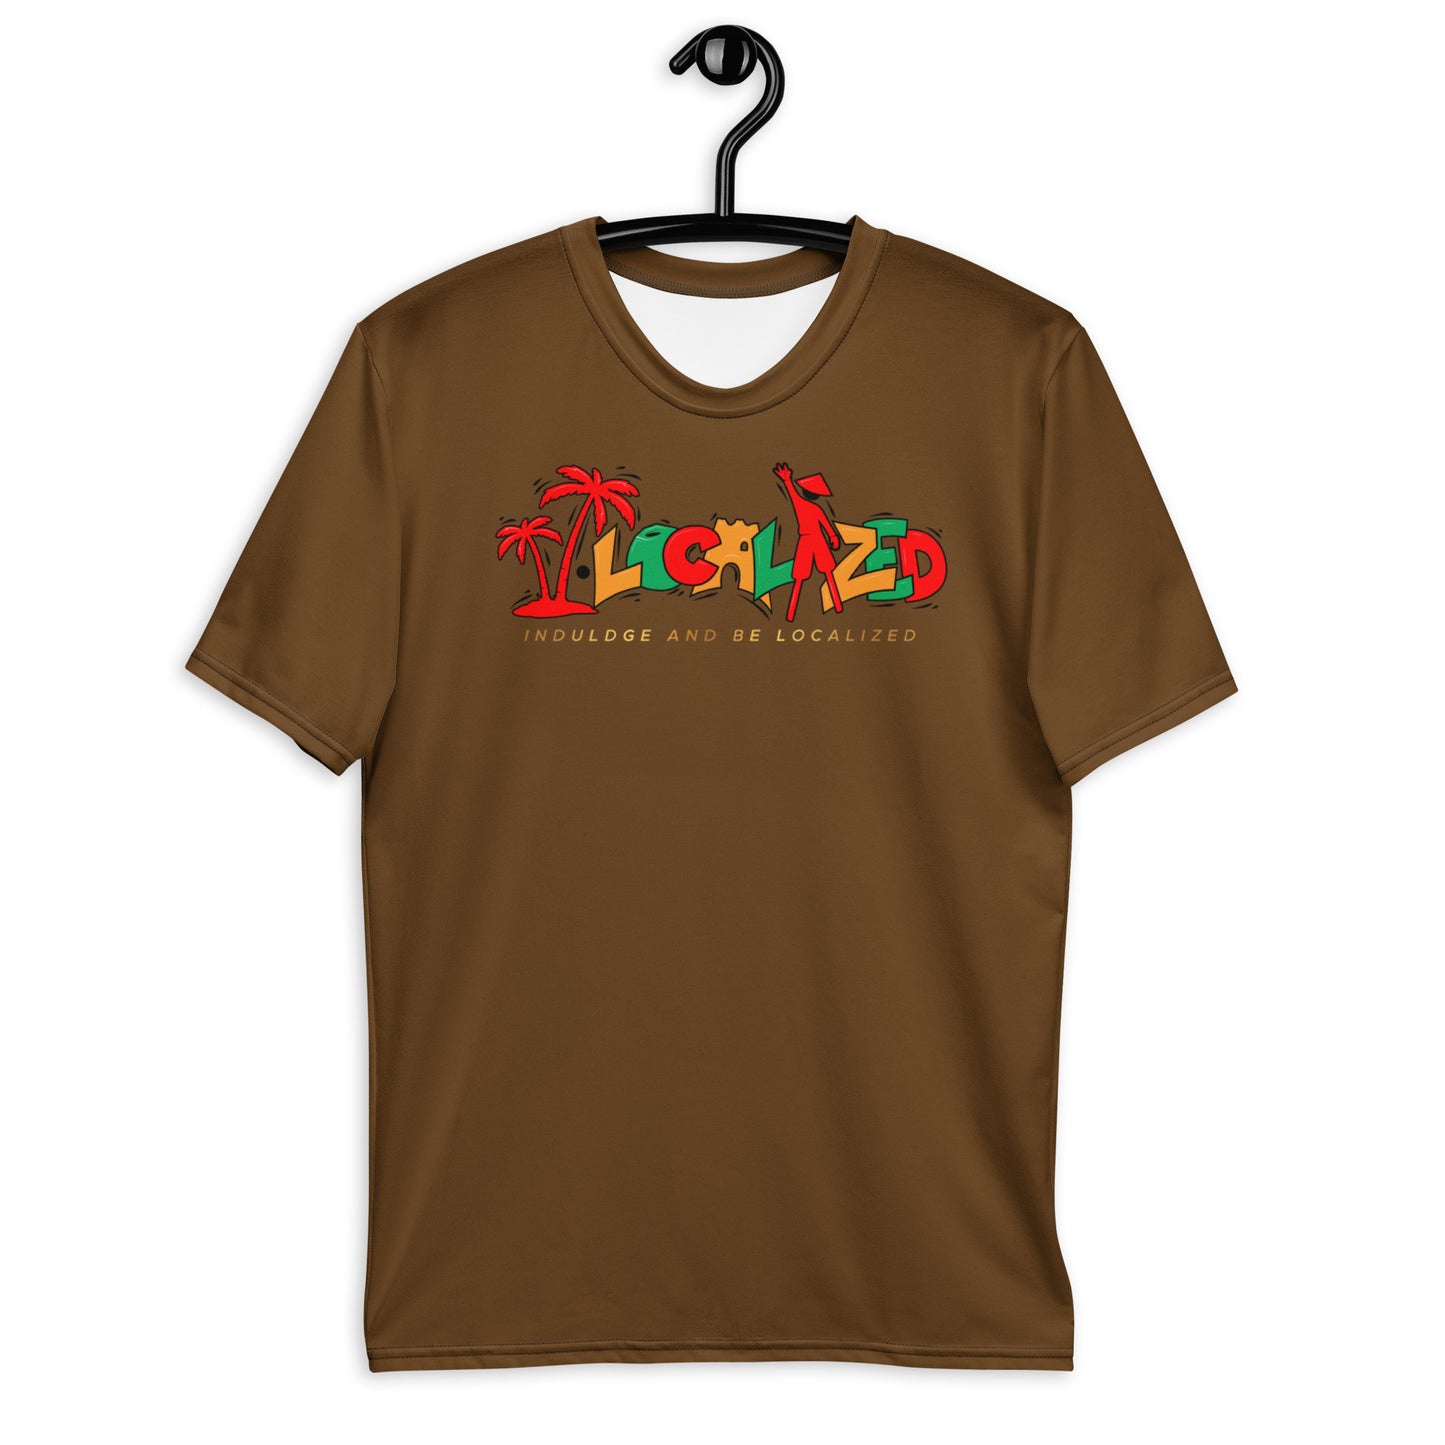 Brown V.Localized (Ice/Gold/Green) Men’s Dry-Fit T-shirt